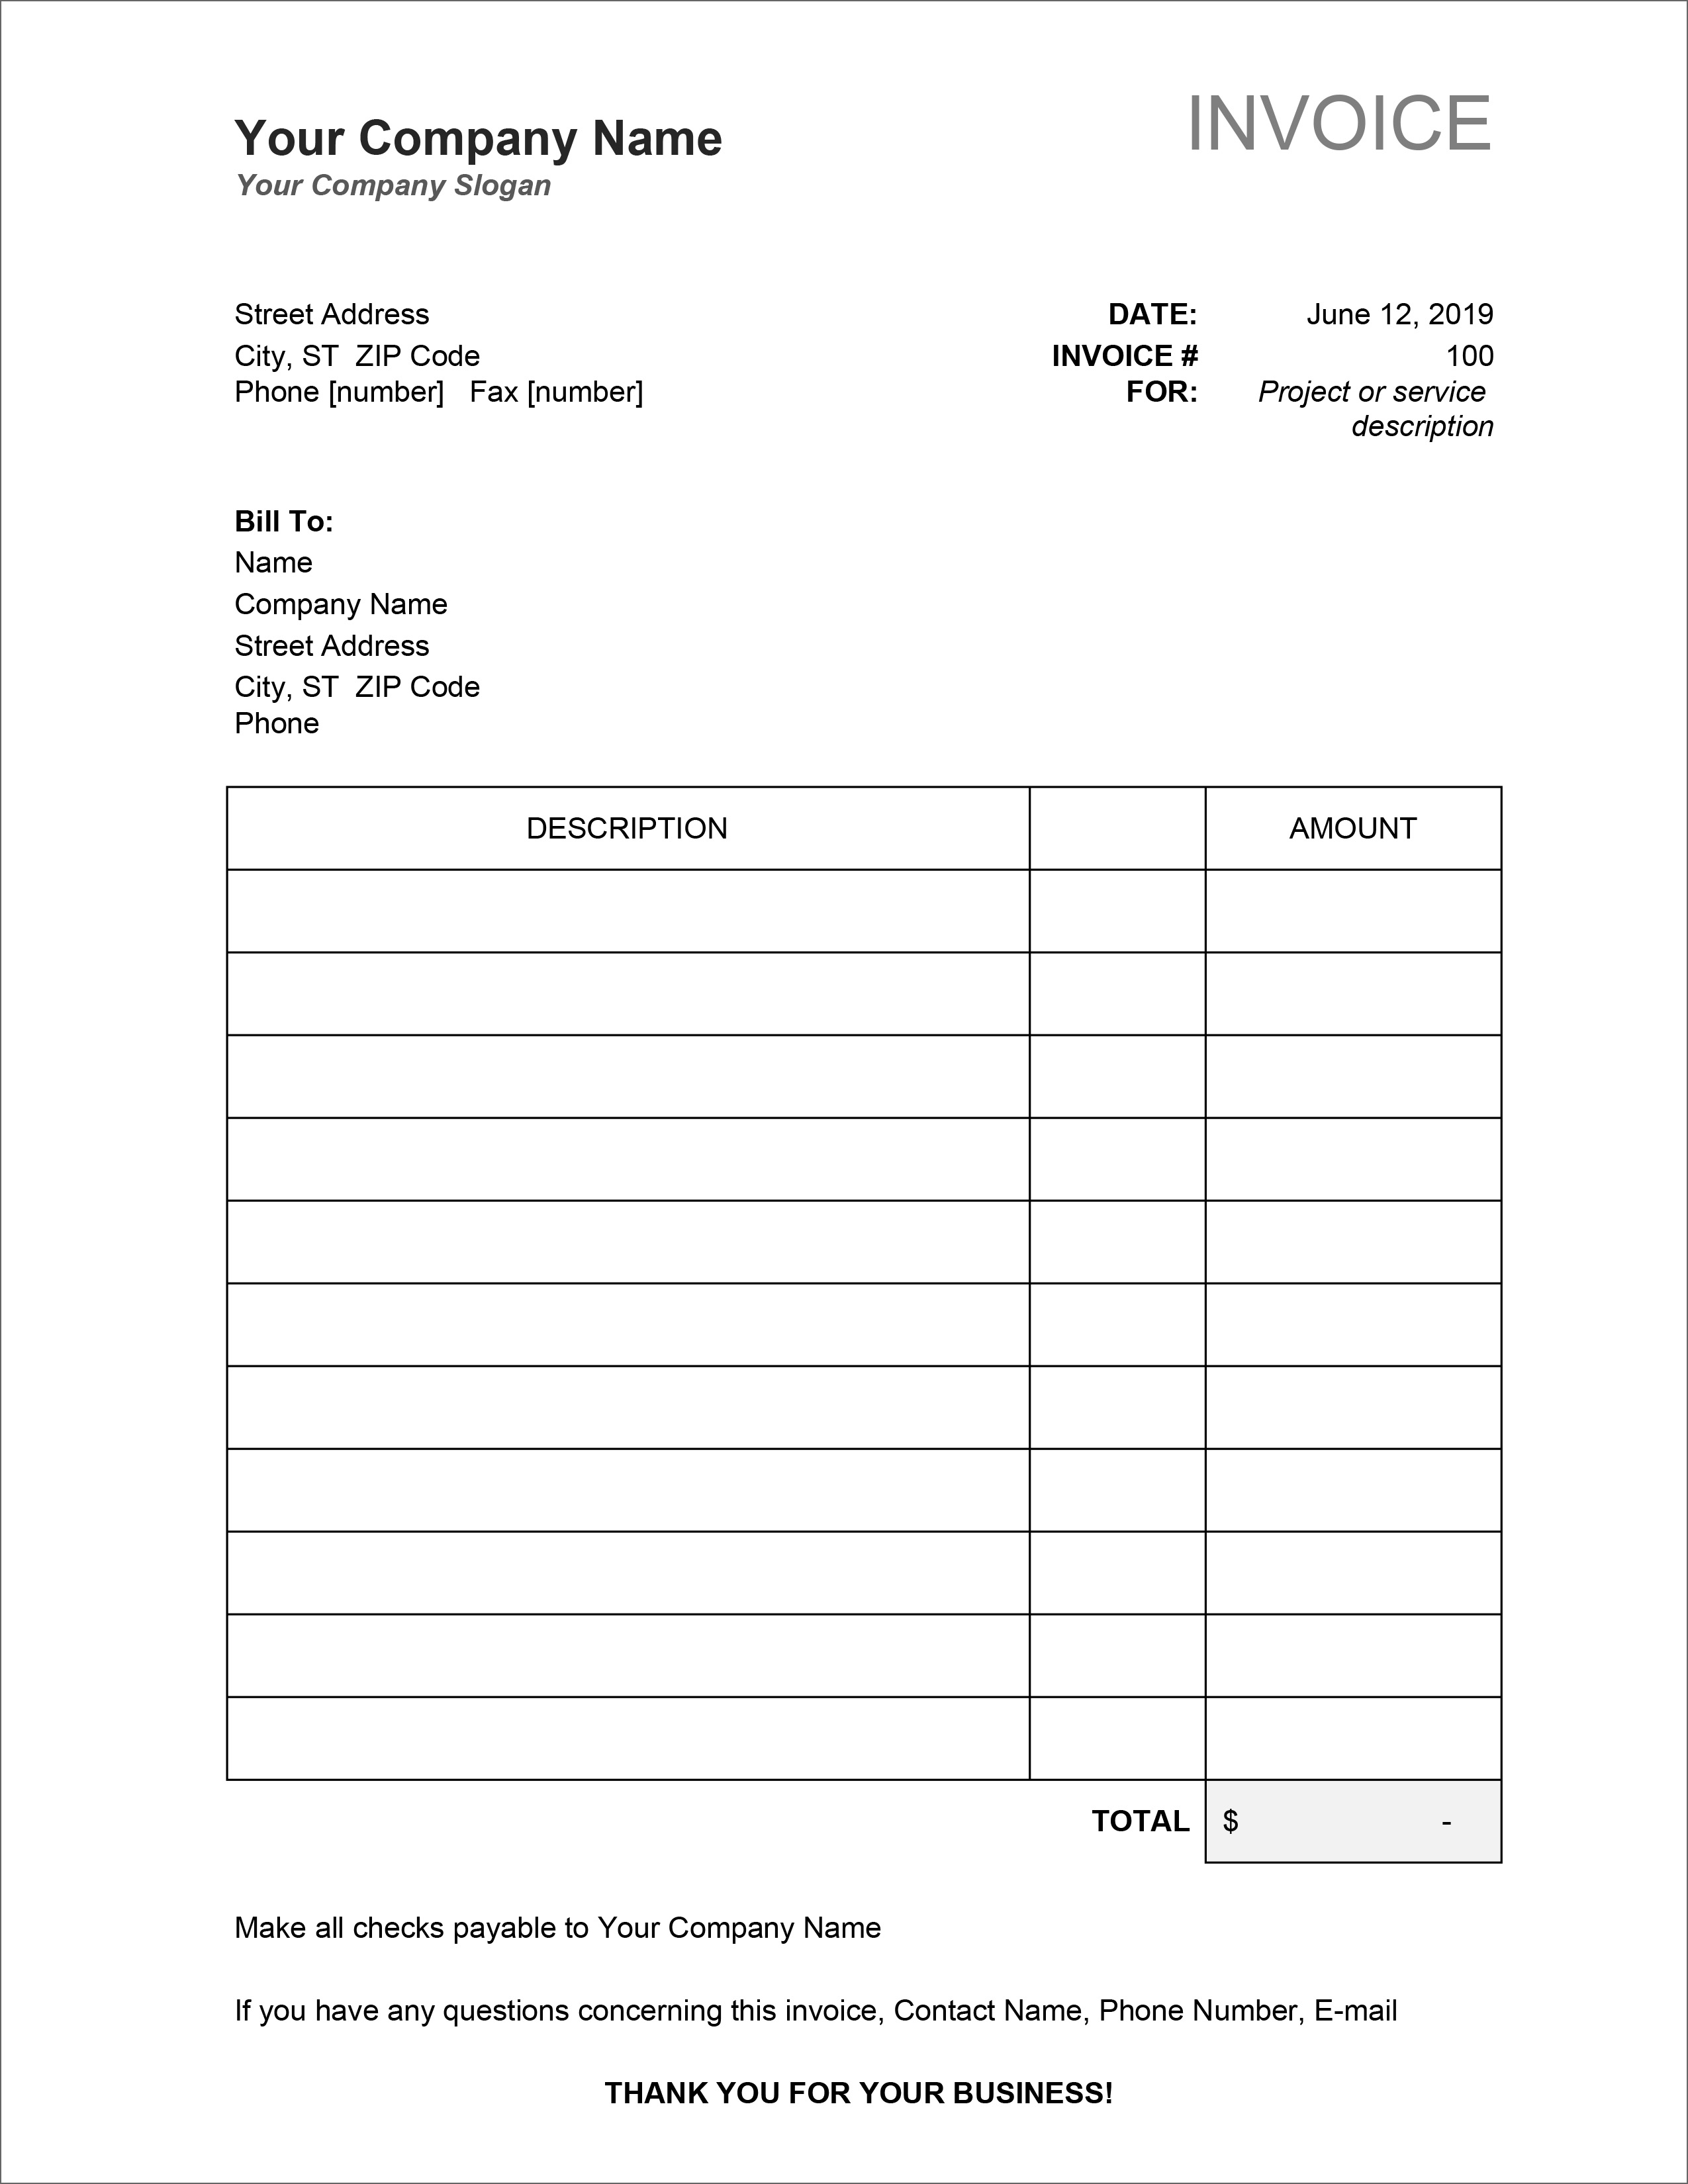 22 Free Invoice Templates In Microsoft Excel And DOCX Formats In Free Downloadable Invoice Template For Word